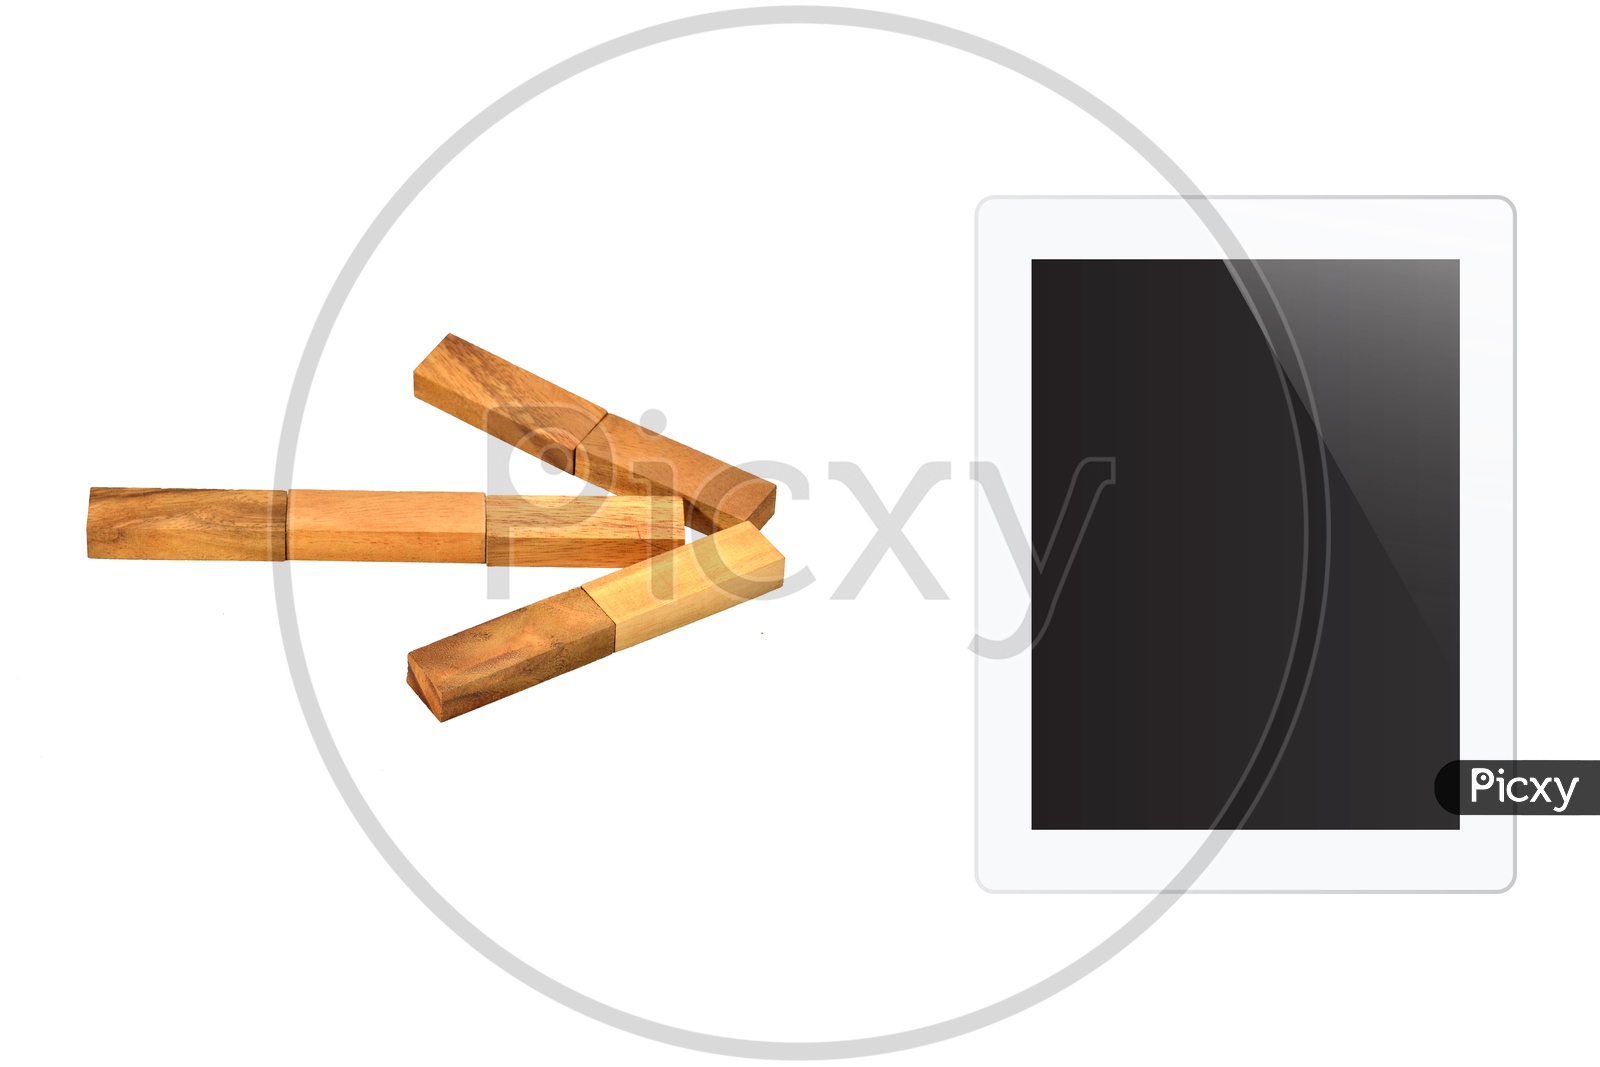 Tablet Gadget With Wooden Blocks On an Isolated White Background